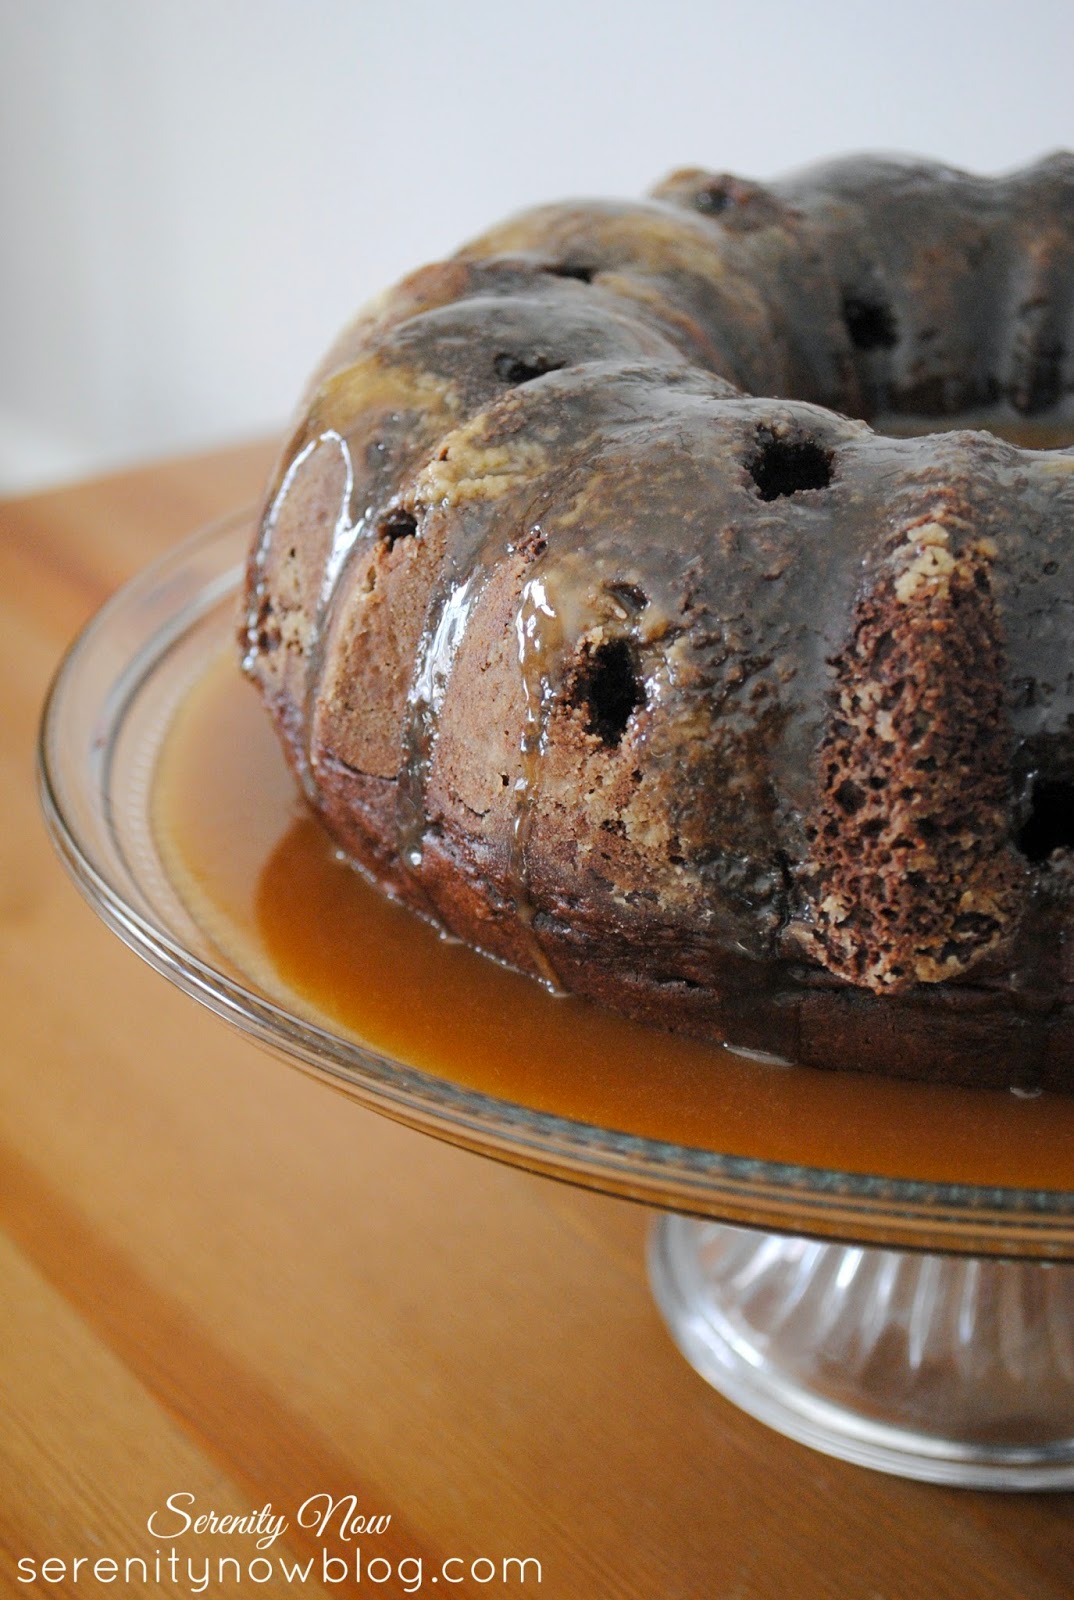 Easy Chocolate "Sunday" Bundt Cake from Serenity Now- so sinful you'll need to go to church on Sunday!